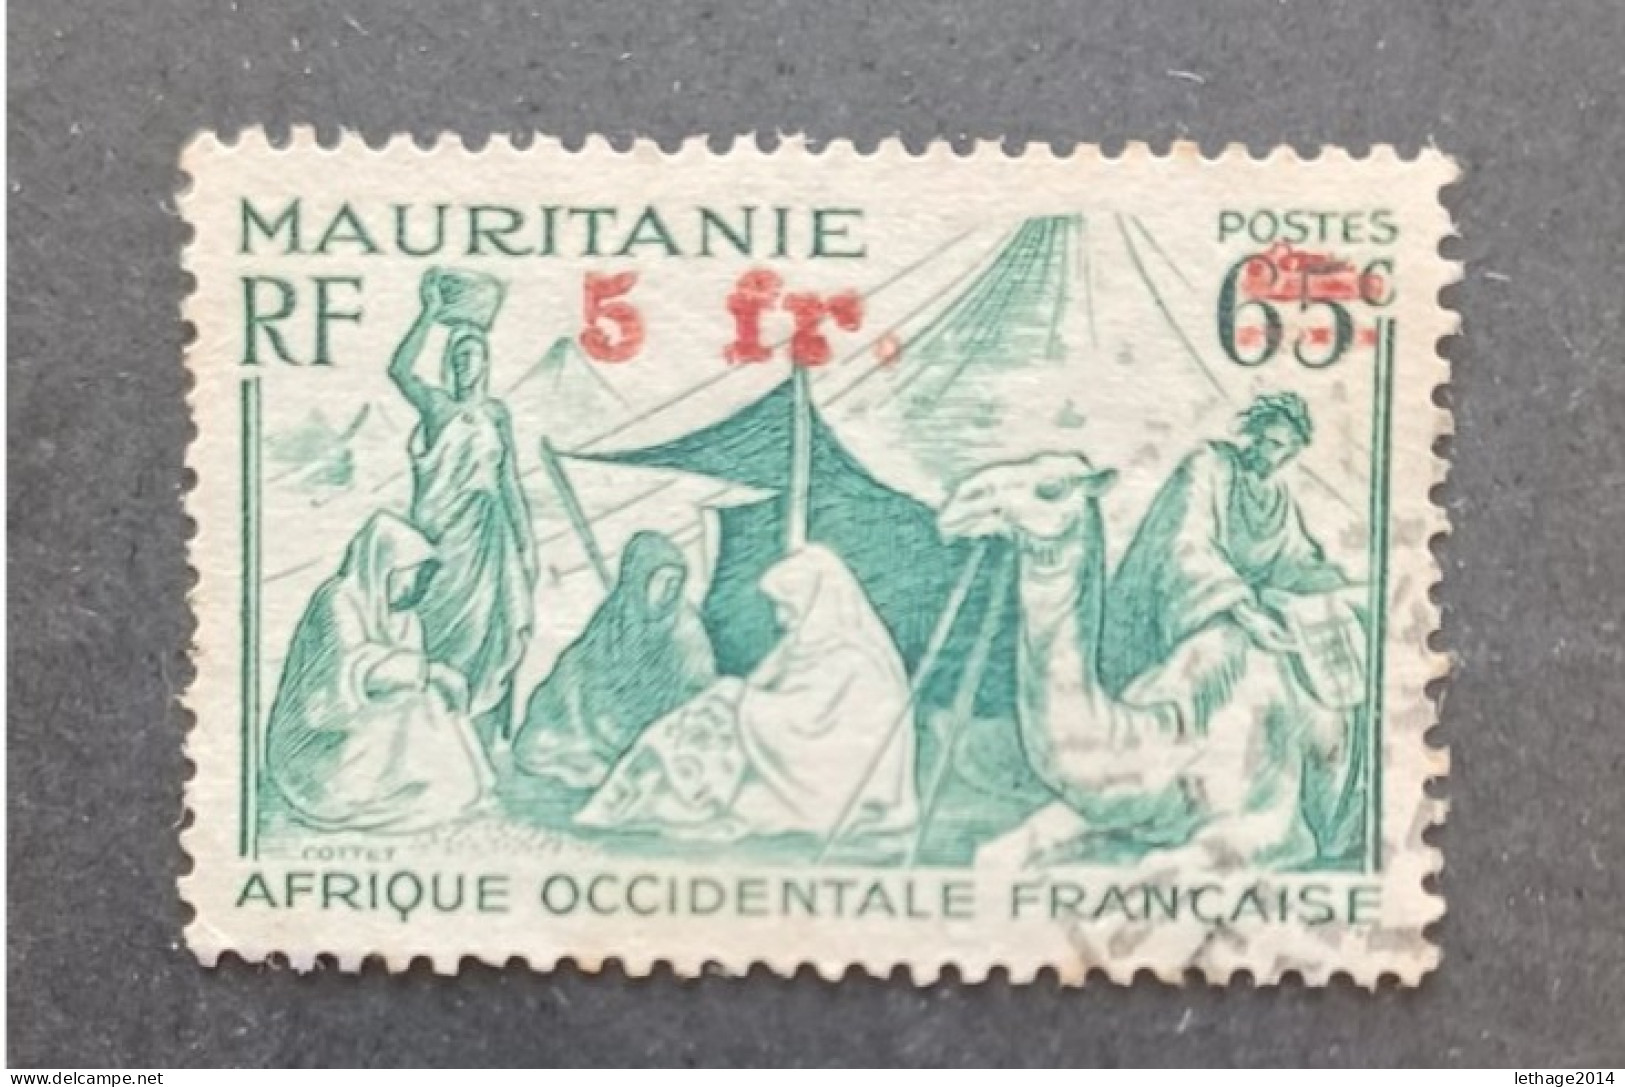 COLONIE FRANCE MAURITANIE 1944 NOMADES CAT YVERT N 135 VARIETY OVERPRINT TRIPLE STRETCH TO THE RIGHT - Gebruikt